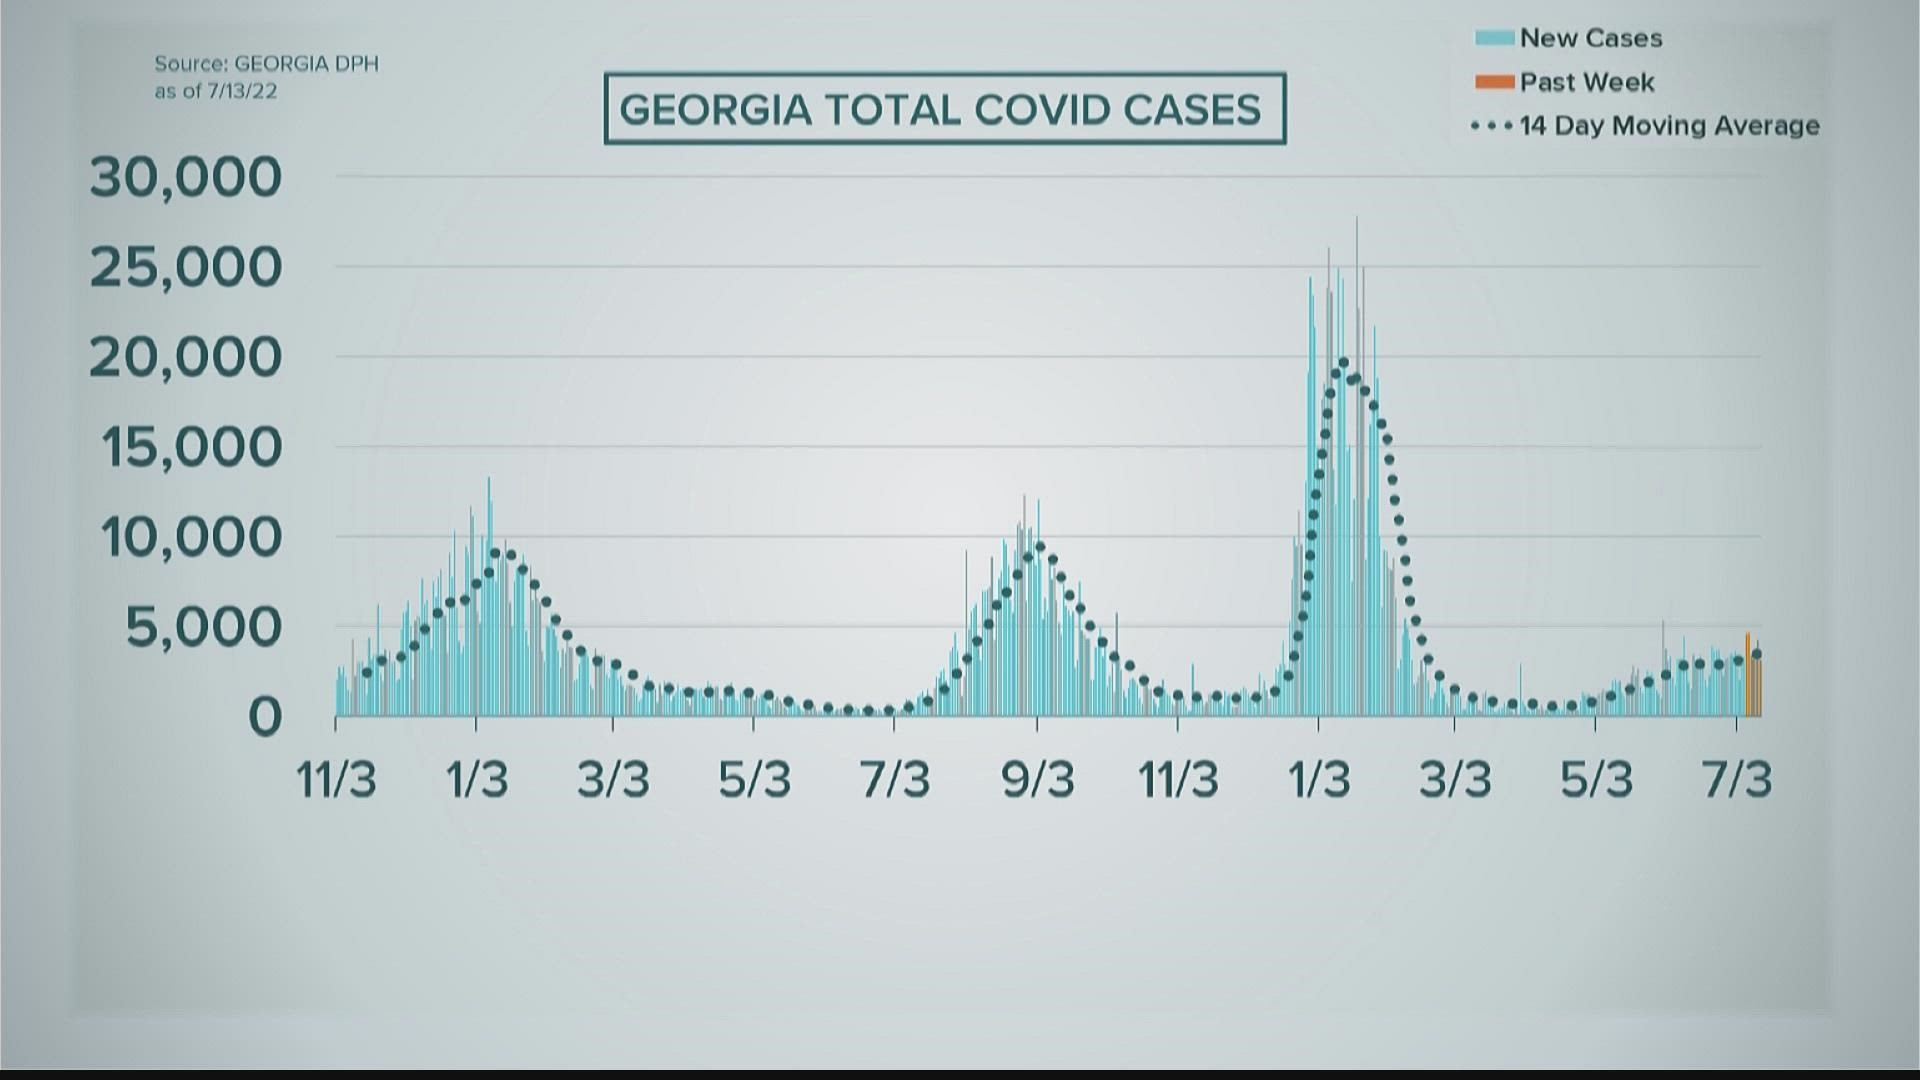 DPH data shows cases are up about 29 percent. Overall, deaths have remained low.